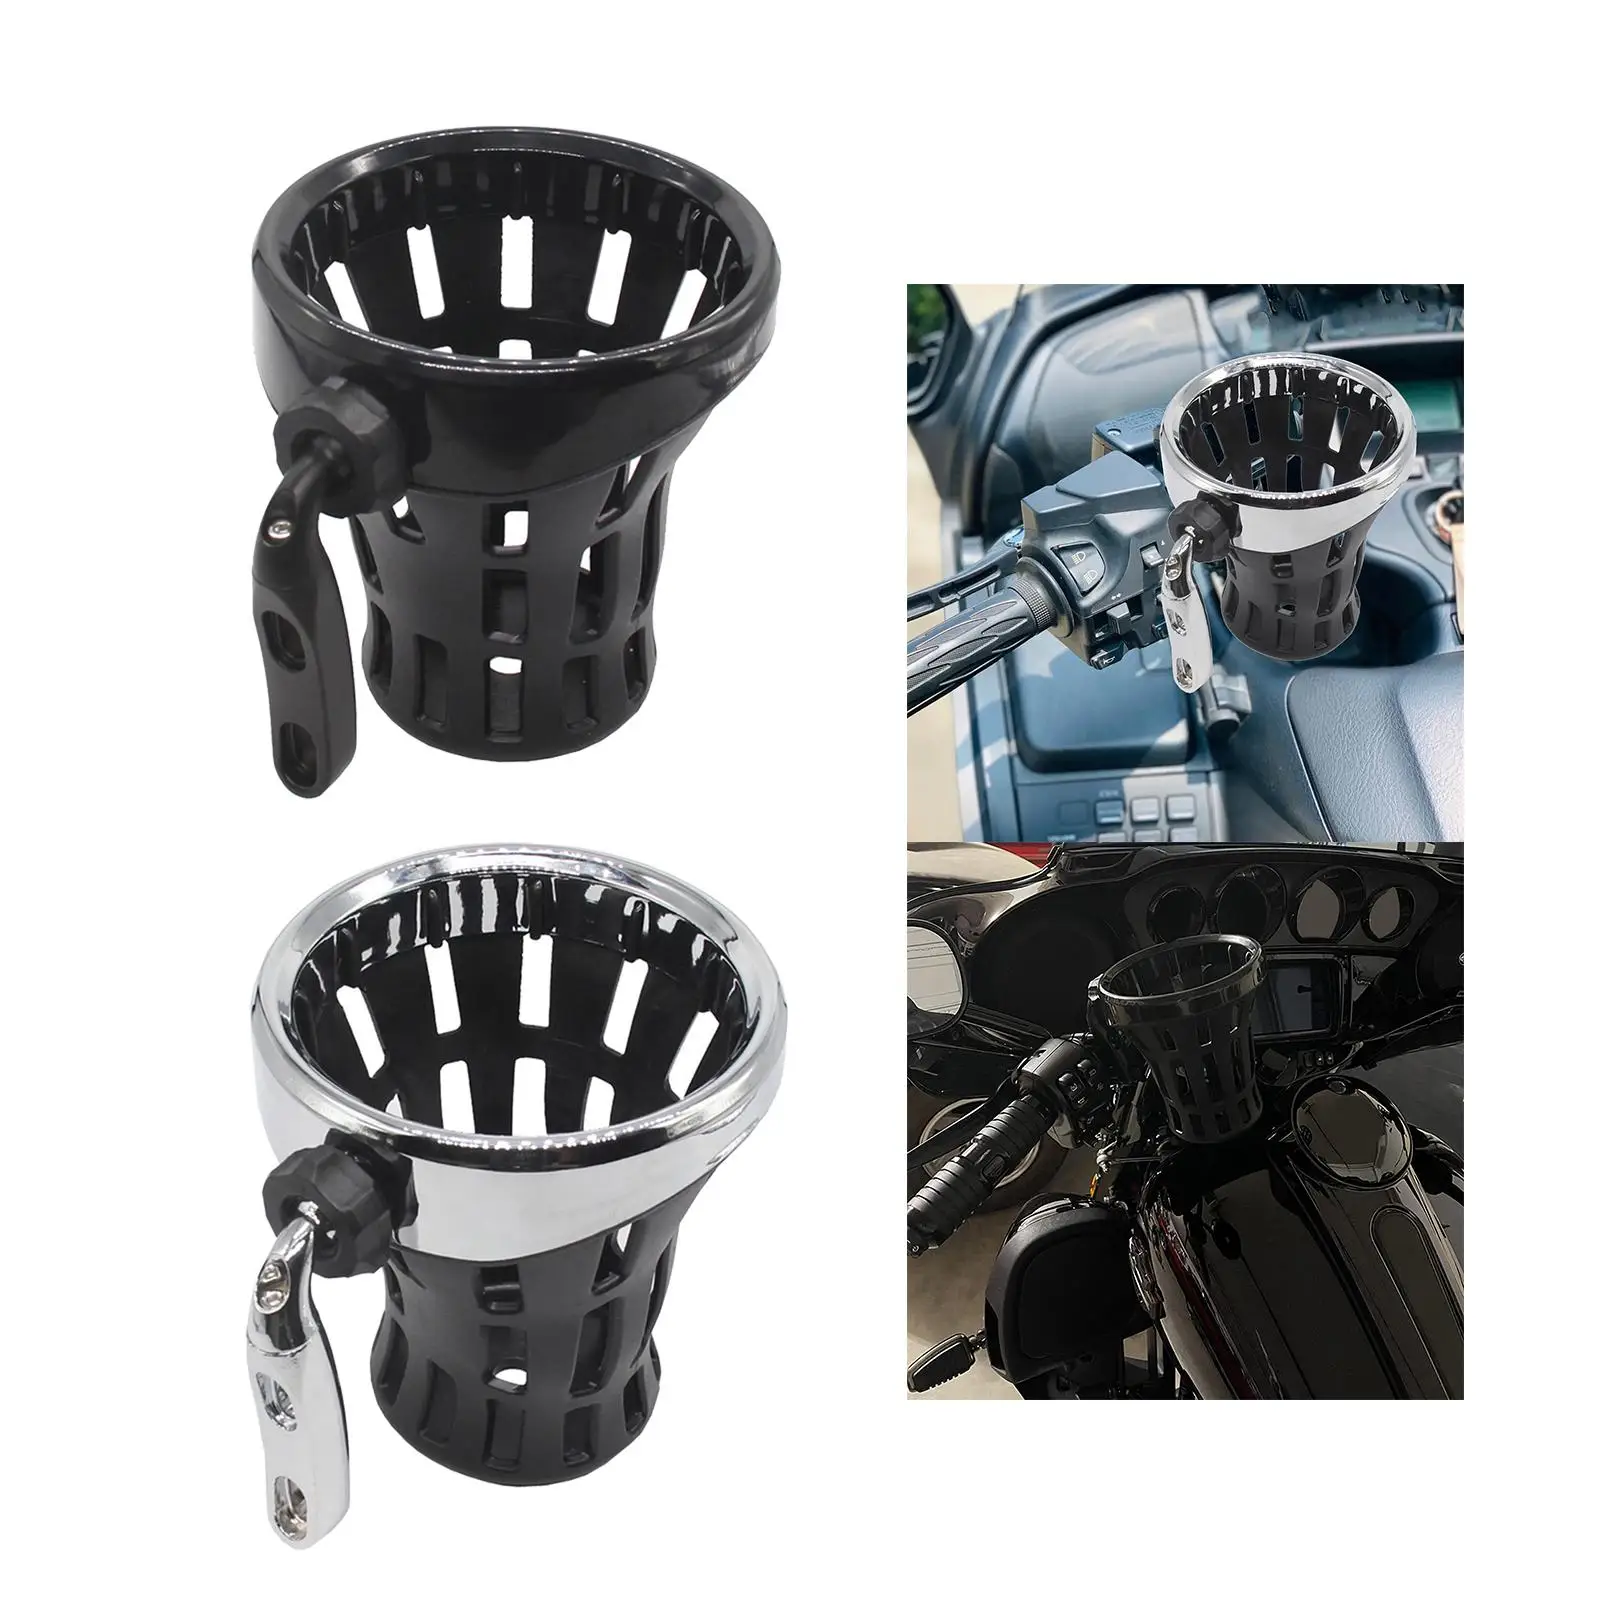 Drink Cup Holder Direct Replaces for Gold Wing GL1800 2018up